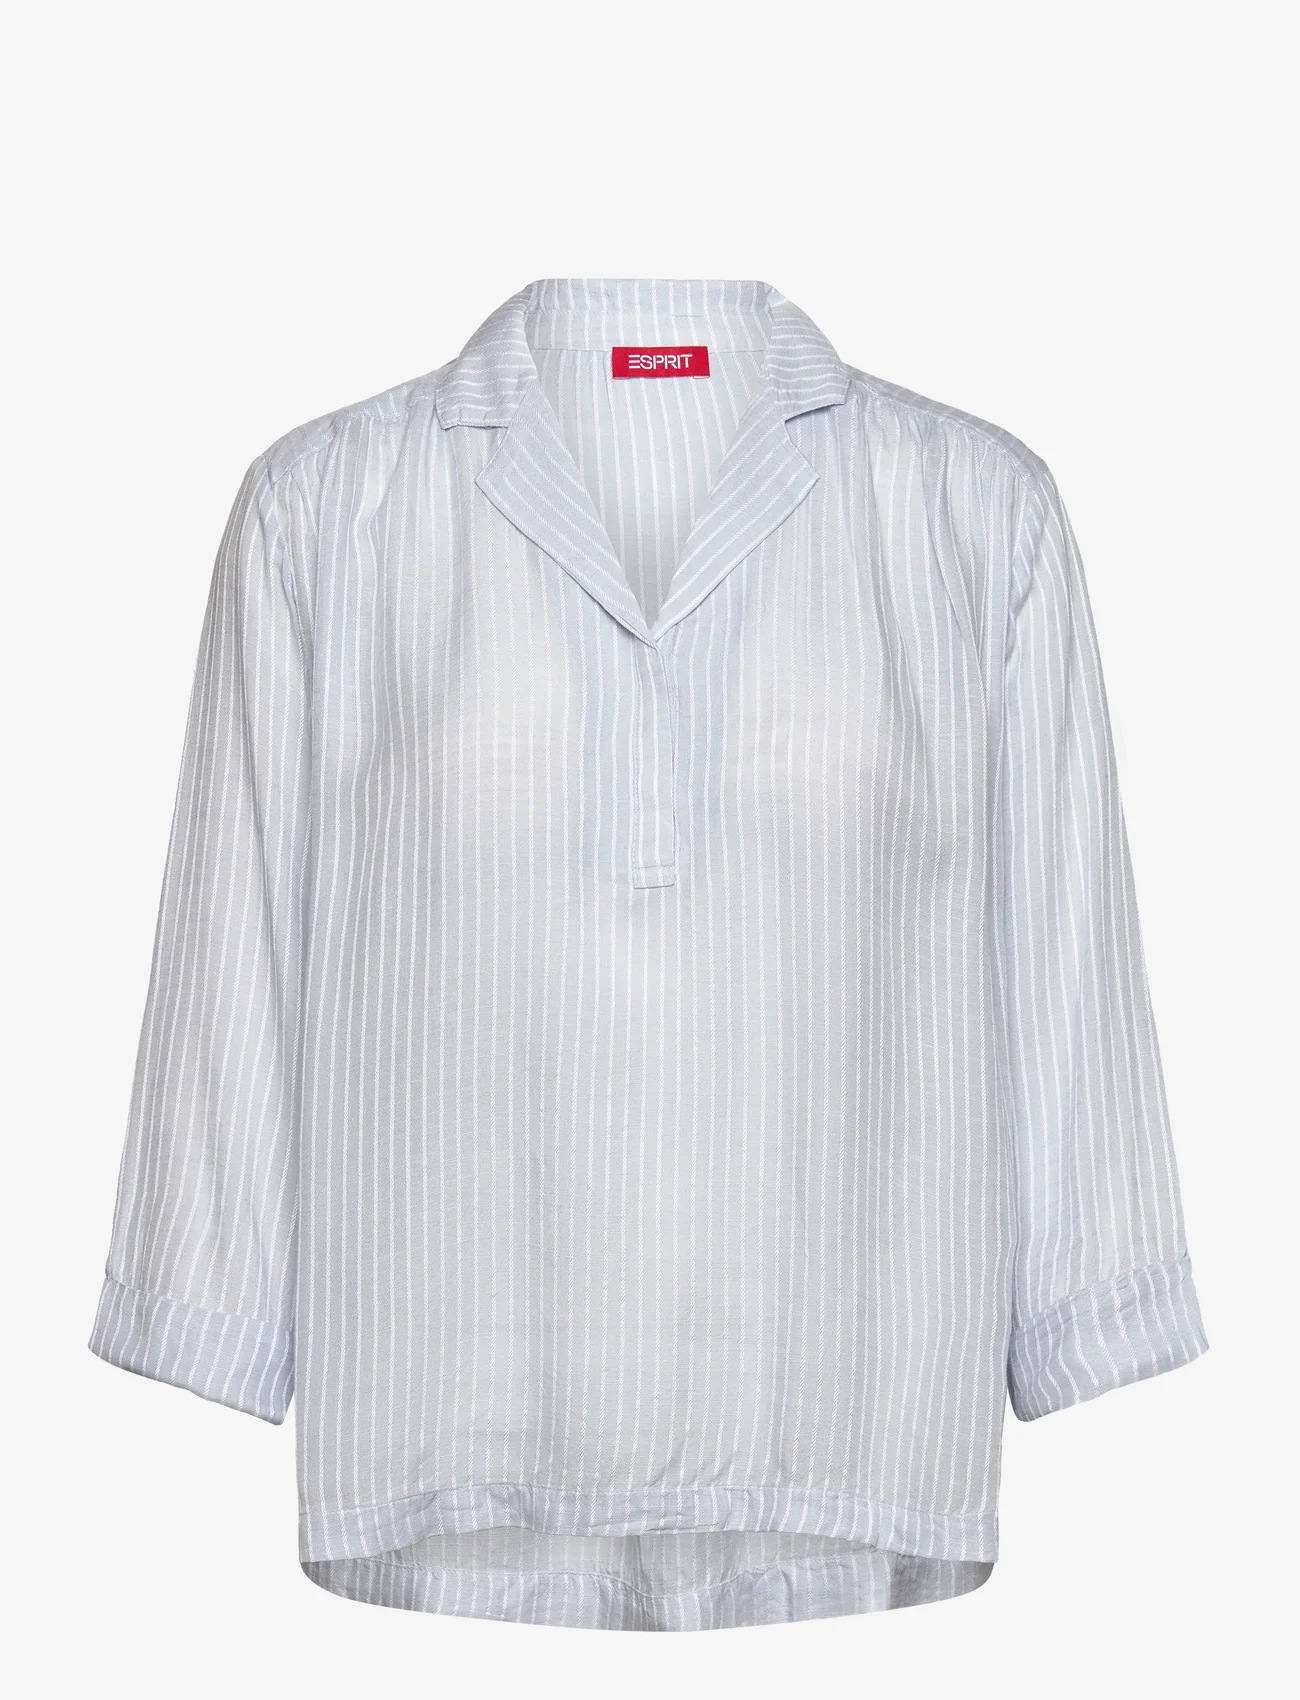 Esprit Casual - Blouses woven - long-sleeved shirts - light blue - 0